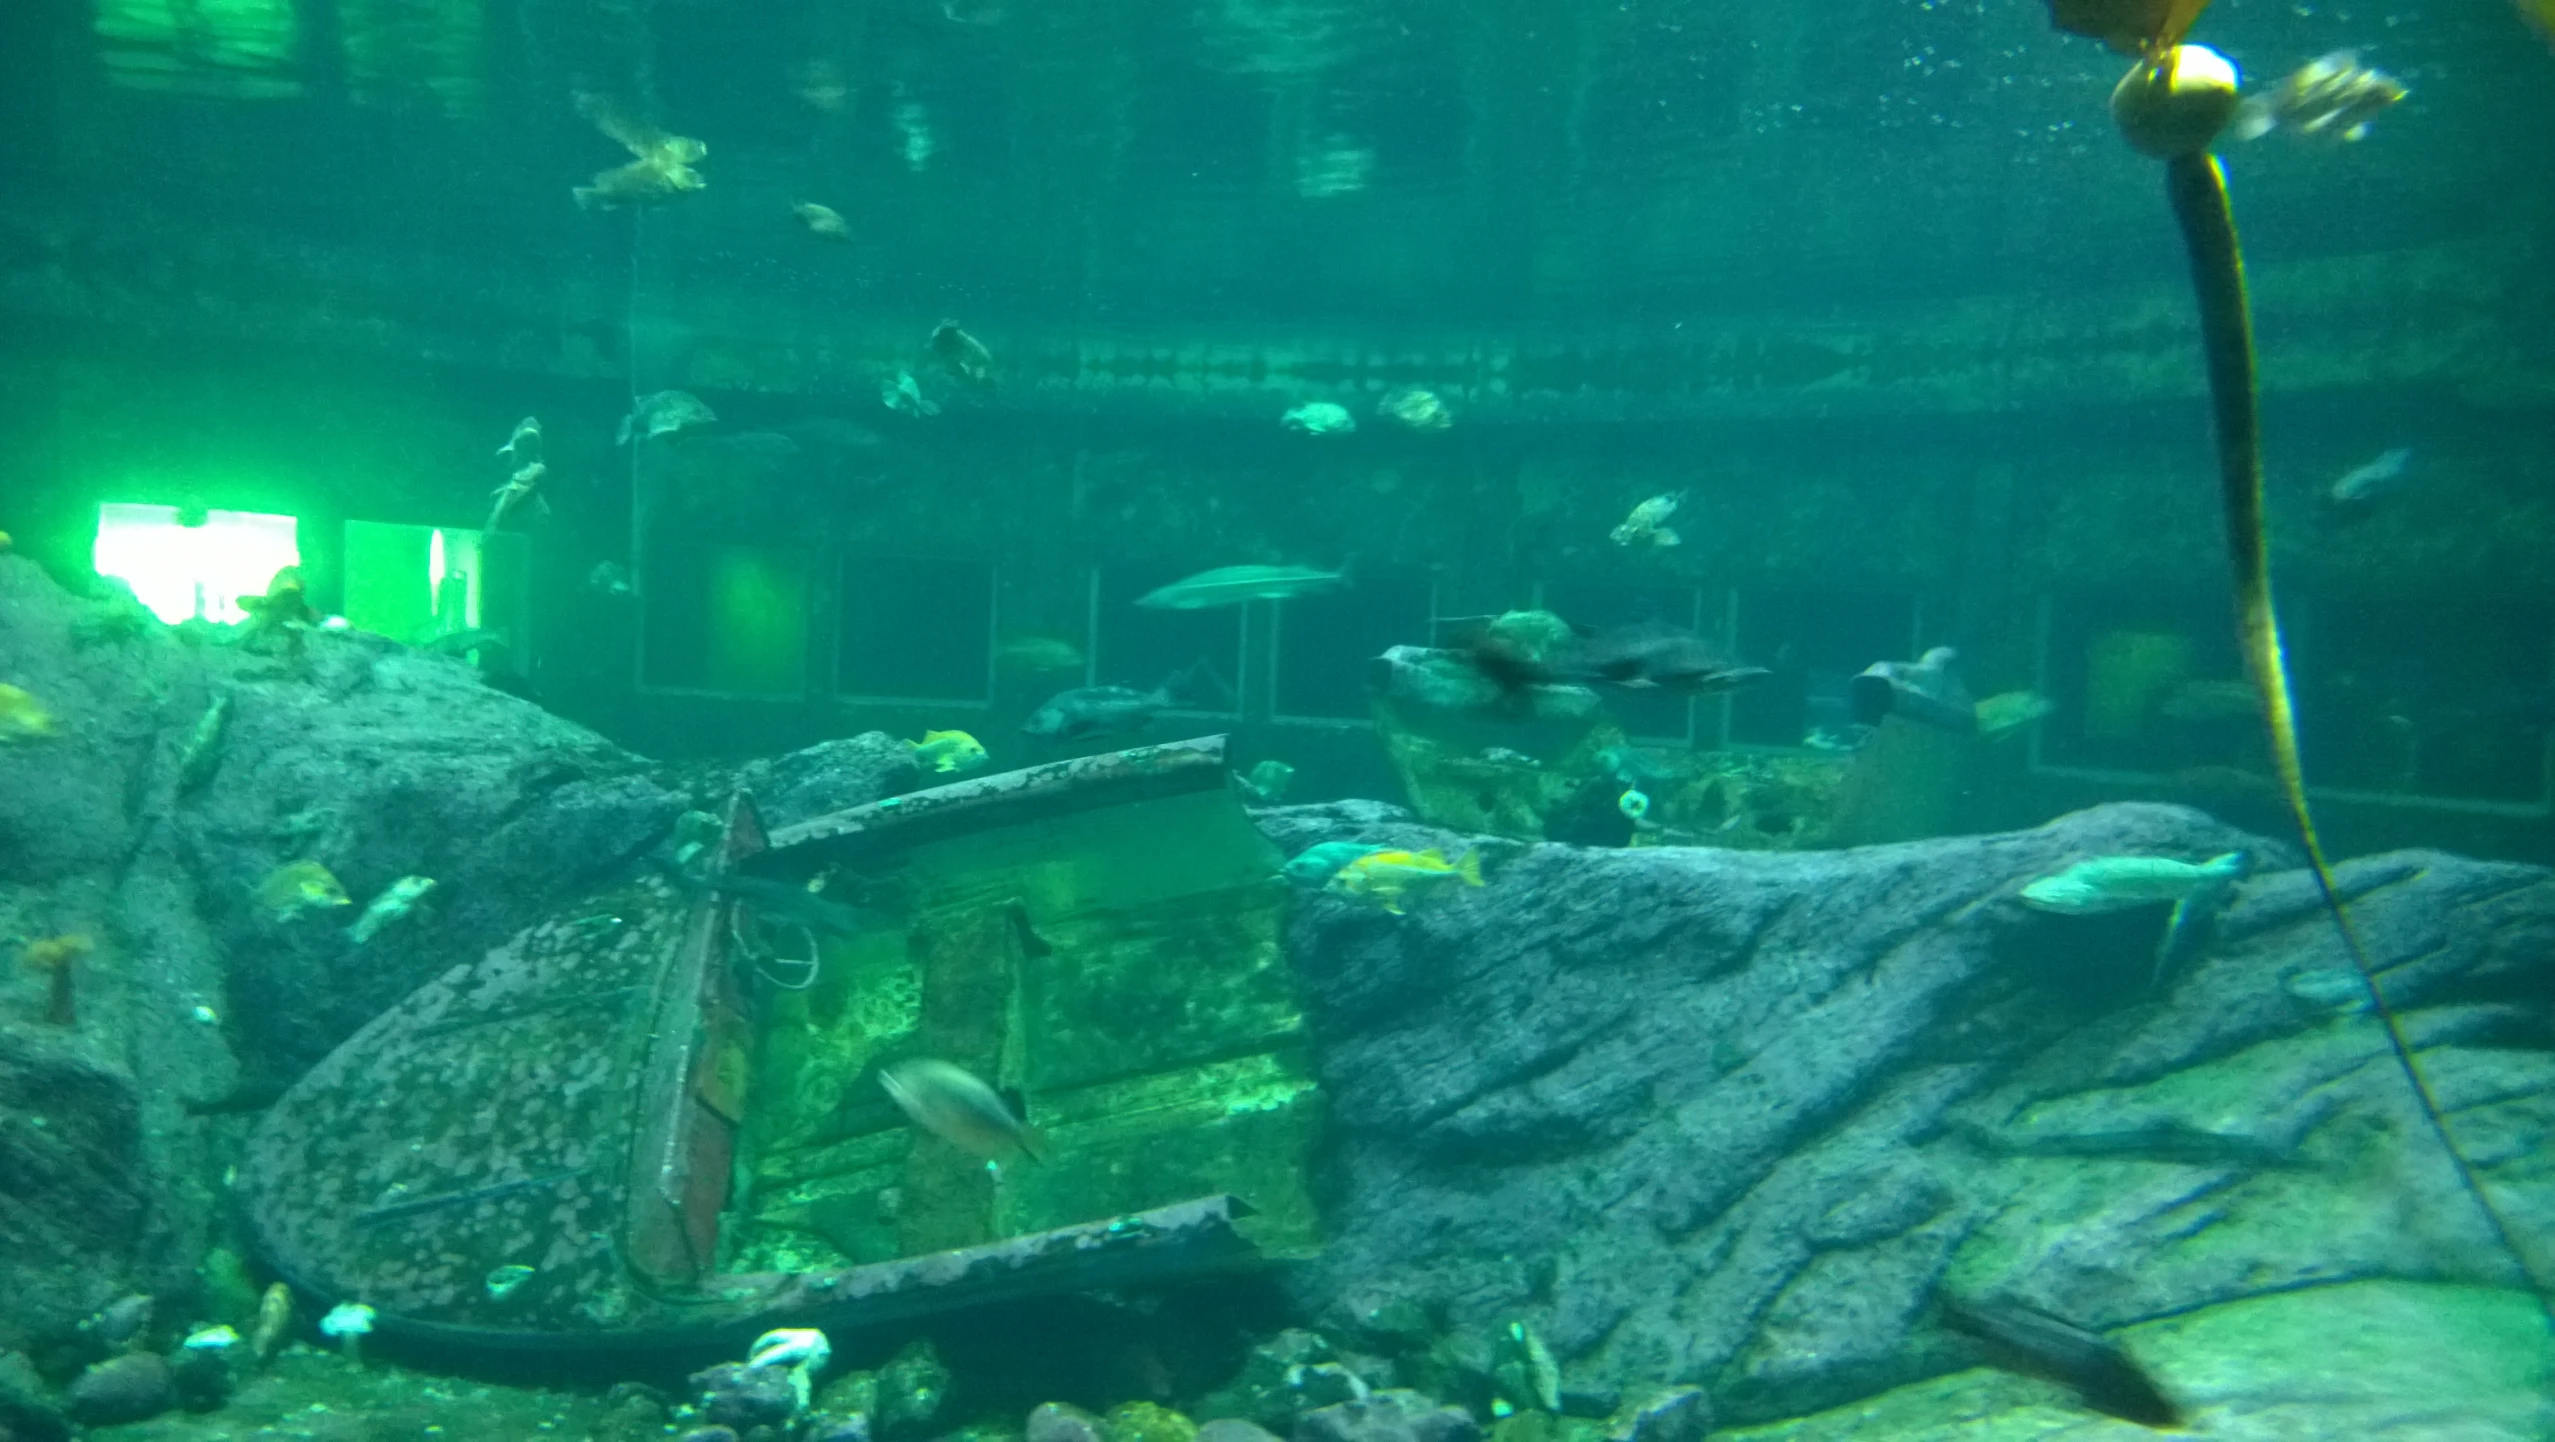 a fish tank in a large aquarium filled with various types of fish